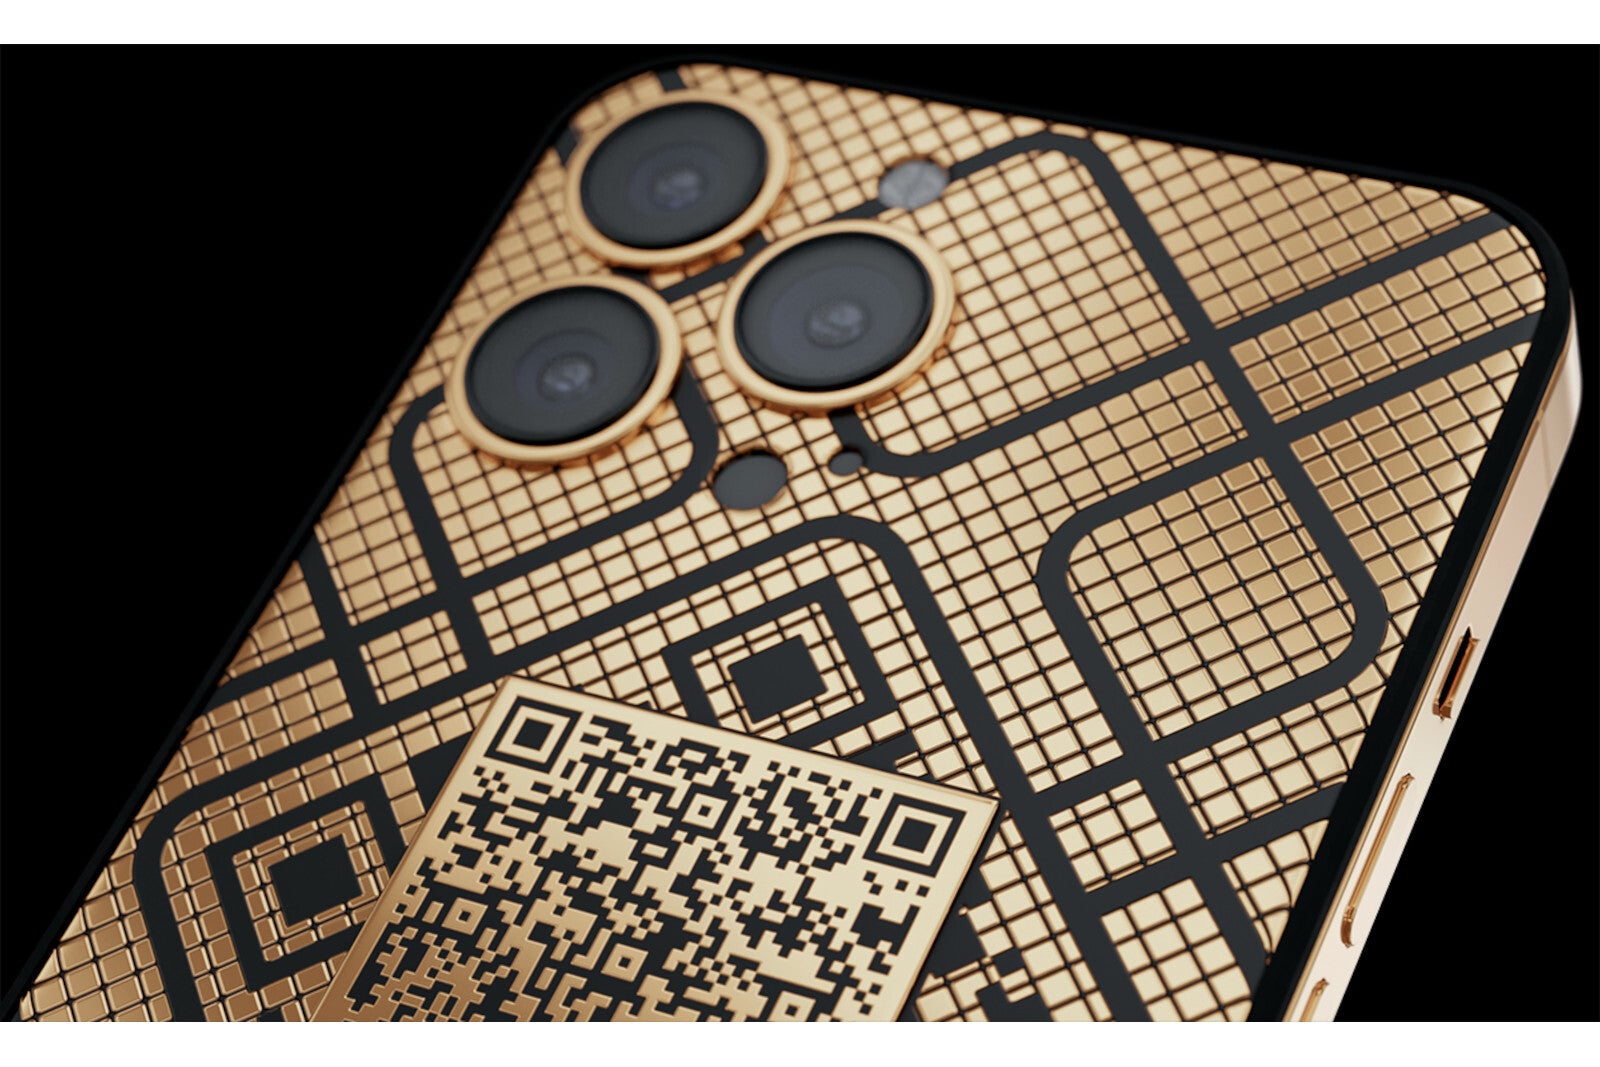 iPhone 13 Pro, Pro Max - GOLDEN CARD - You can get an iPhone 13 Pro engraved with a gold QR code